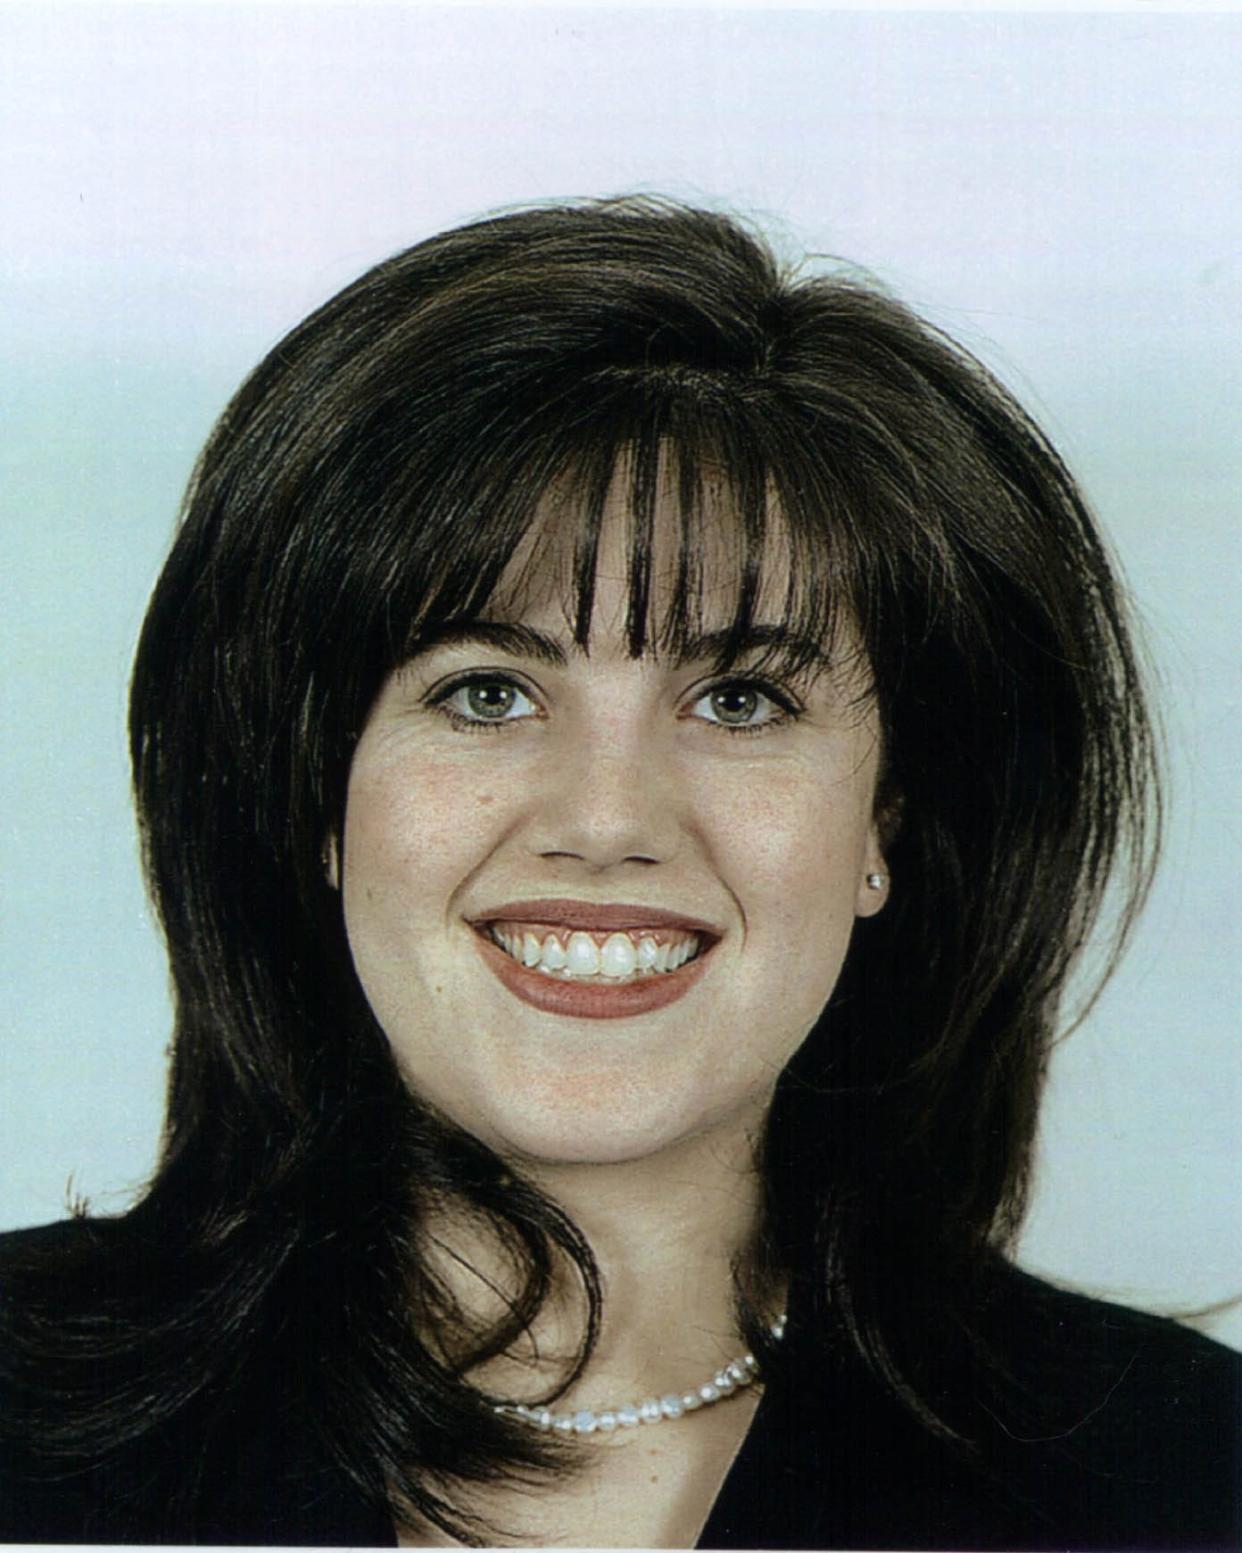 Monica Lewinsky, a former White House intern and Department of Defence employee who reportly has had a year long affair with President Bill Clinton. [Via MerlinFTP Drop]